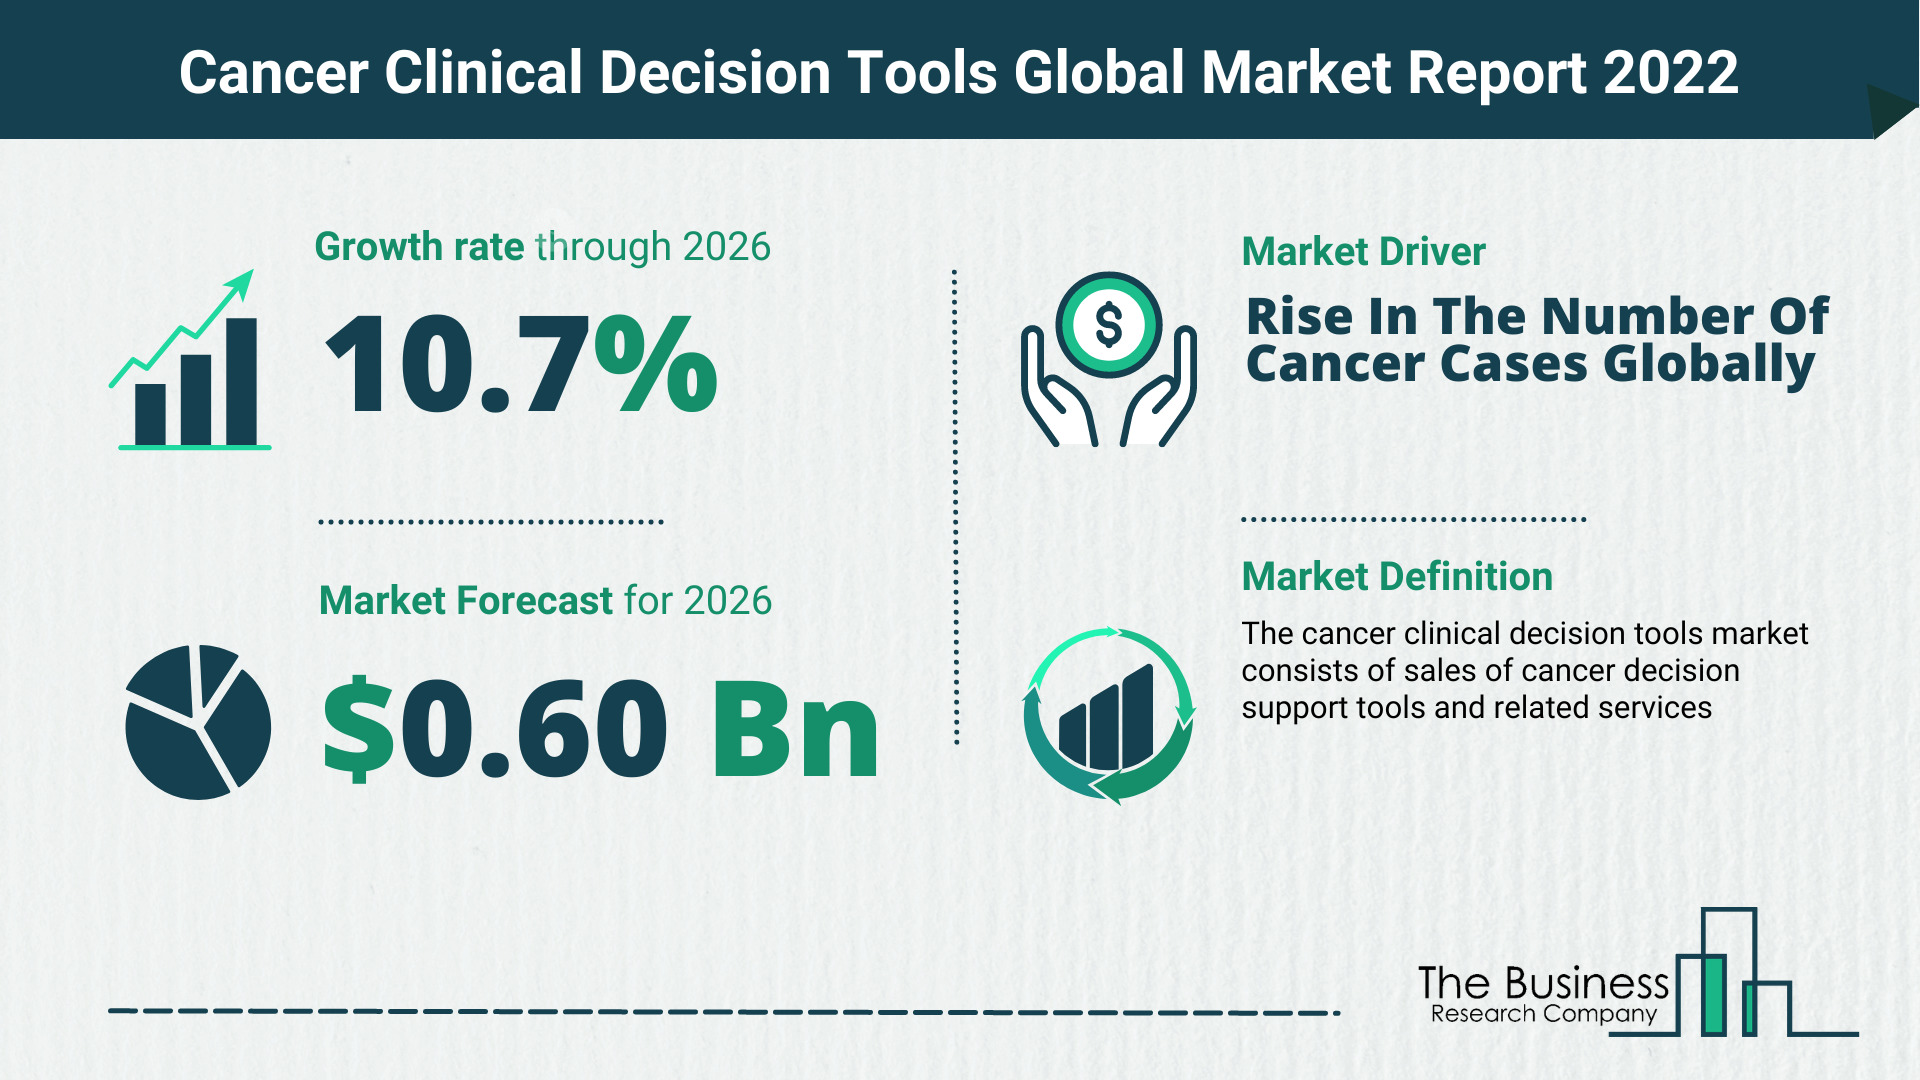 Latest Cancer Clinical Decision Tools Market Growth Study 2022-2026 By The Business Research Company